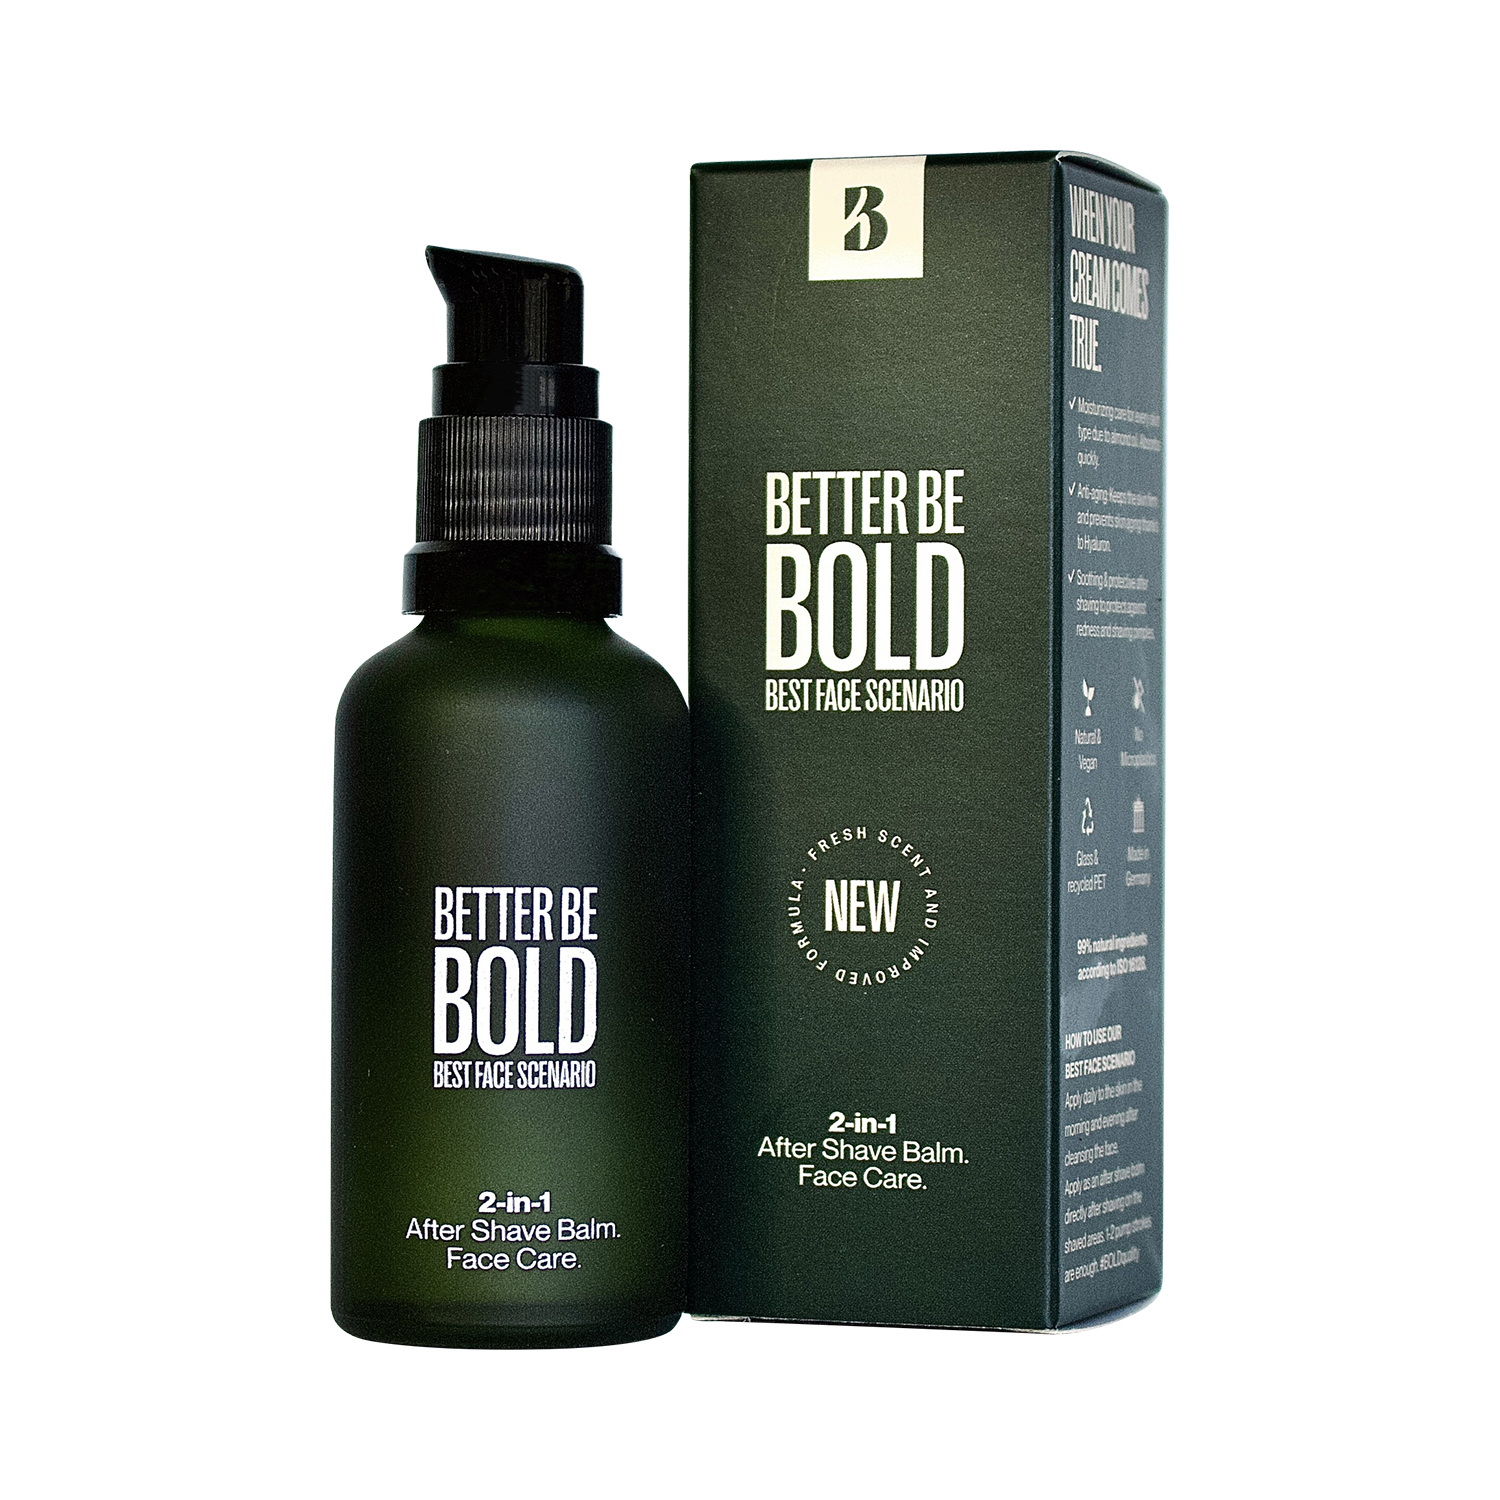 BETTER BE BOLD - 2-in-1 - After Shave Balm - Face Care